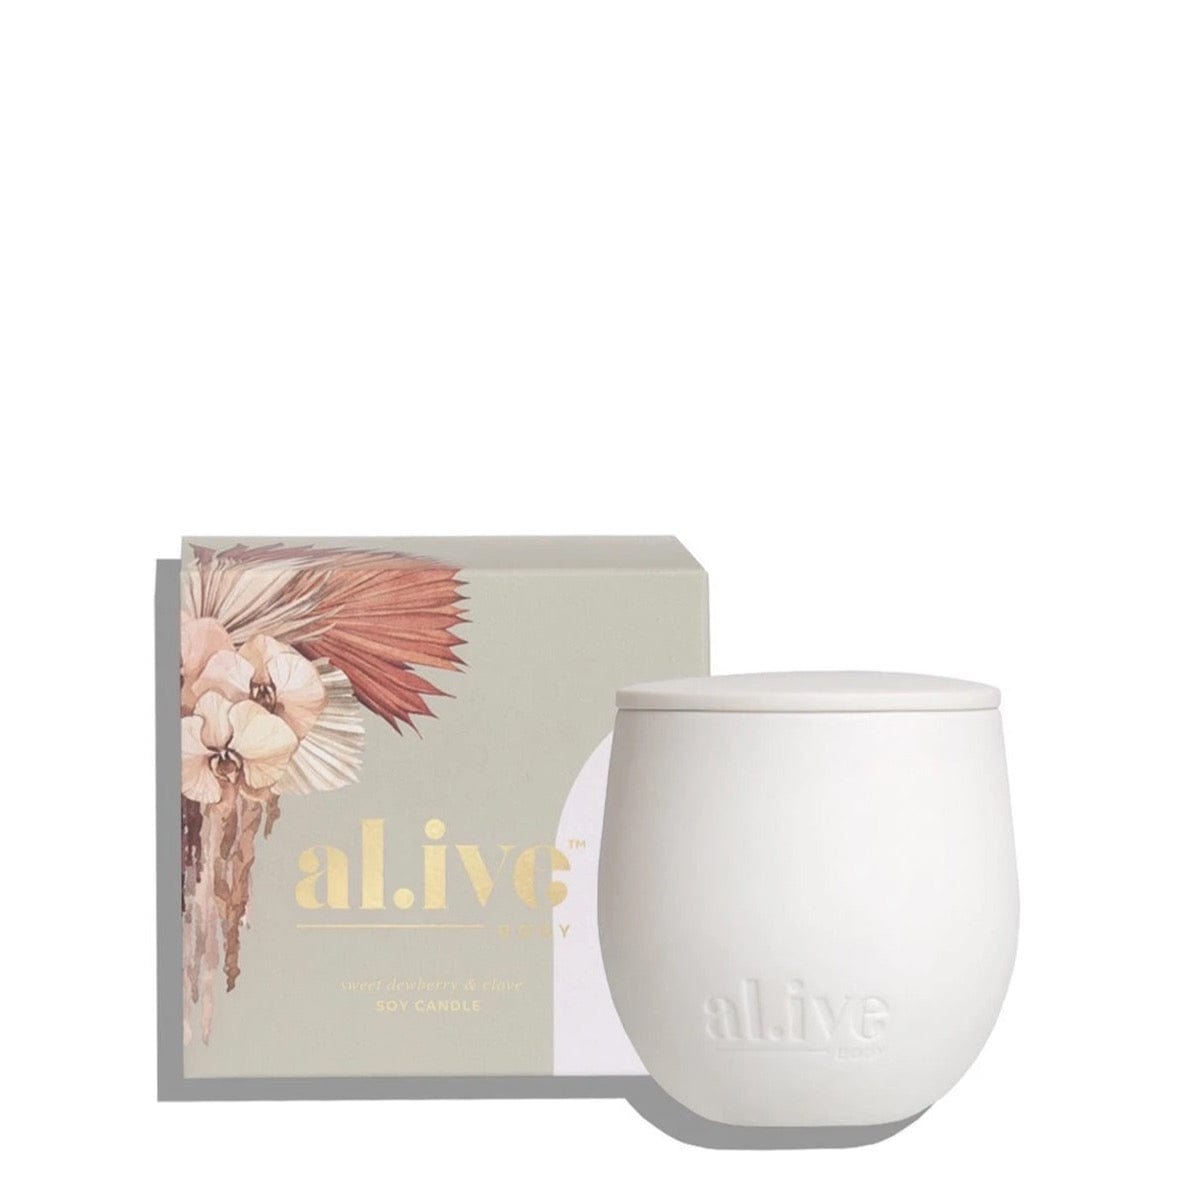 al.ive body Candles Sweet Dewberry & Clove Soy Candle